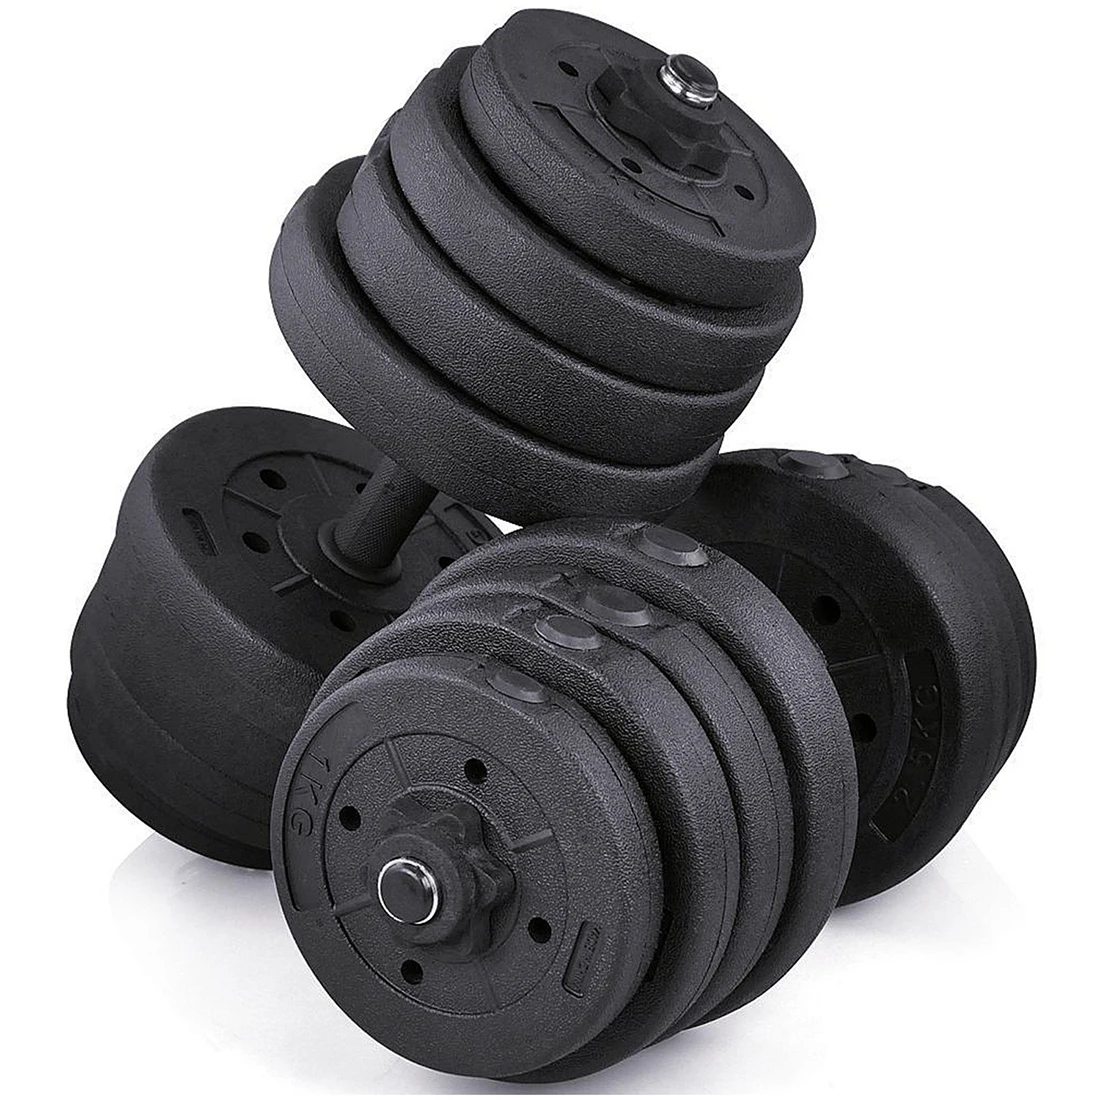 1KG To 30KG Dumbells Pair Gym Weights Dumbbell Body Building Free Weight Set 